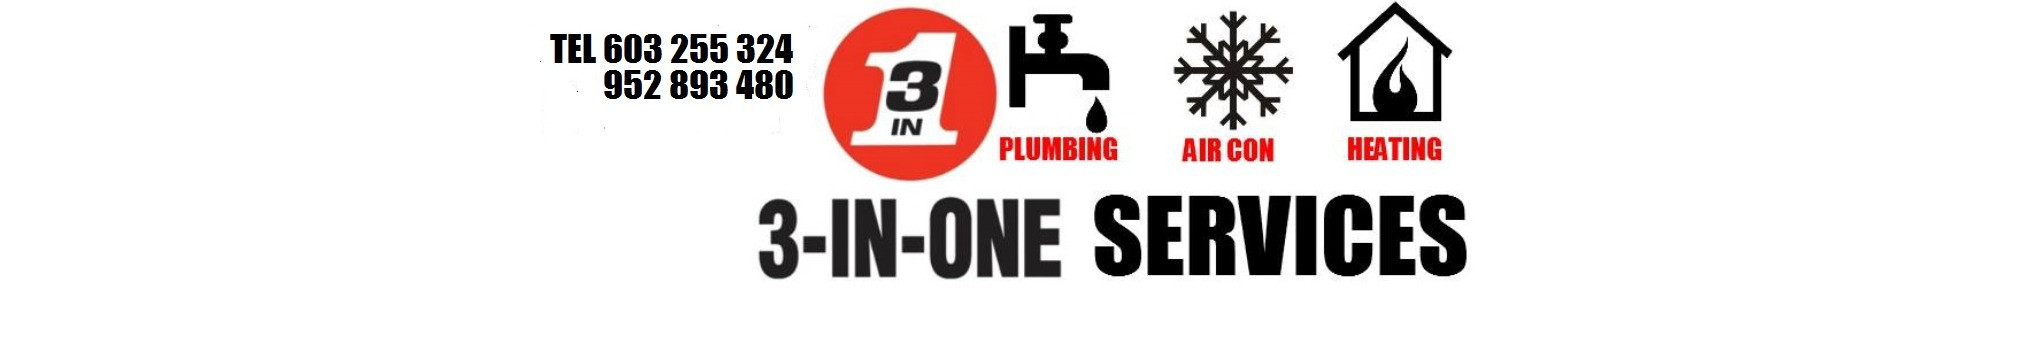 Plumbing Heating and Air con servicing and repairs